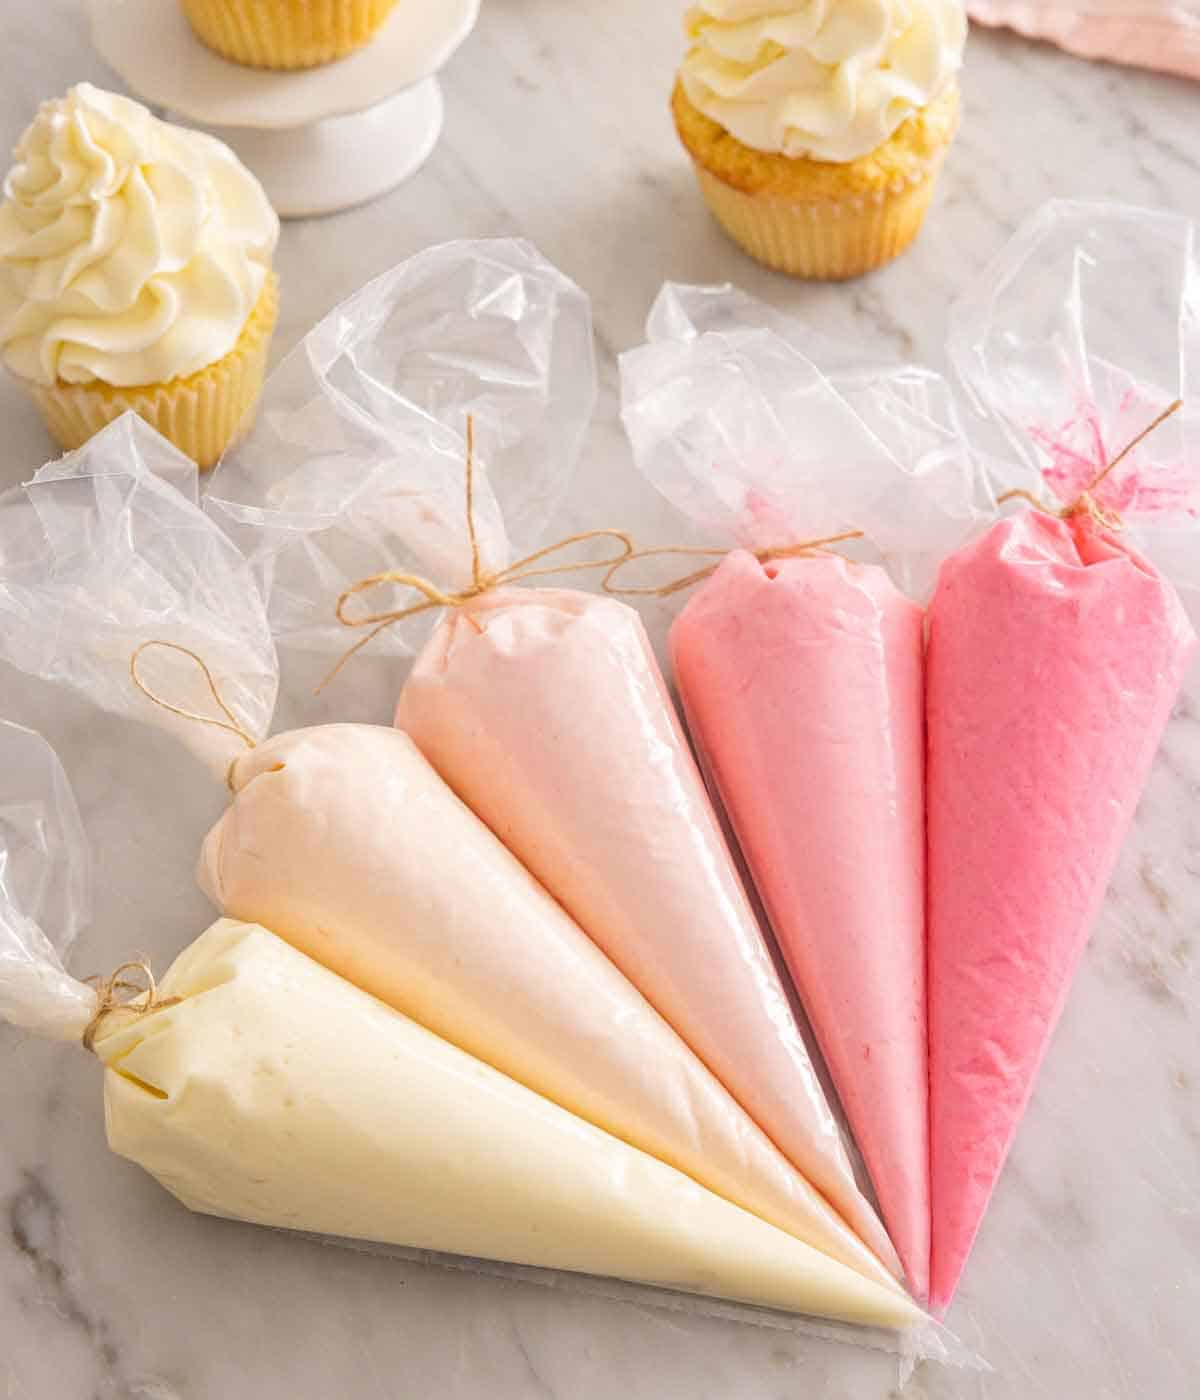 Multiple piping bags filled with colorful Swiss meringue buttercream.